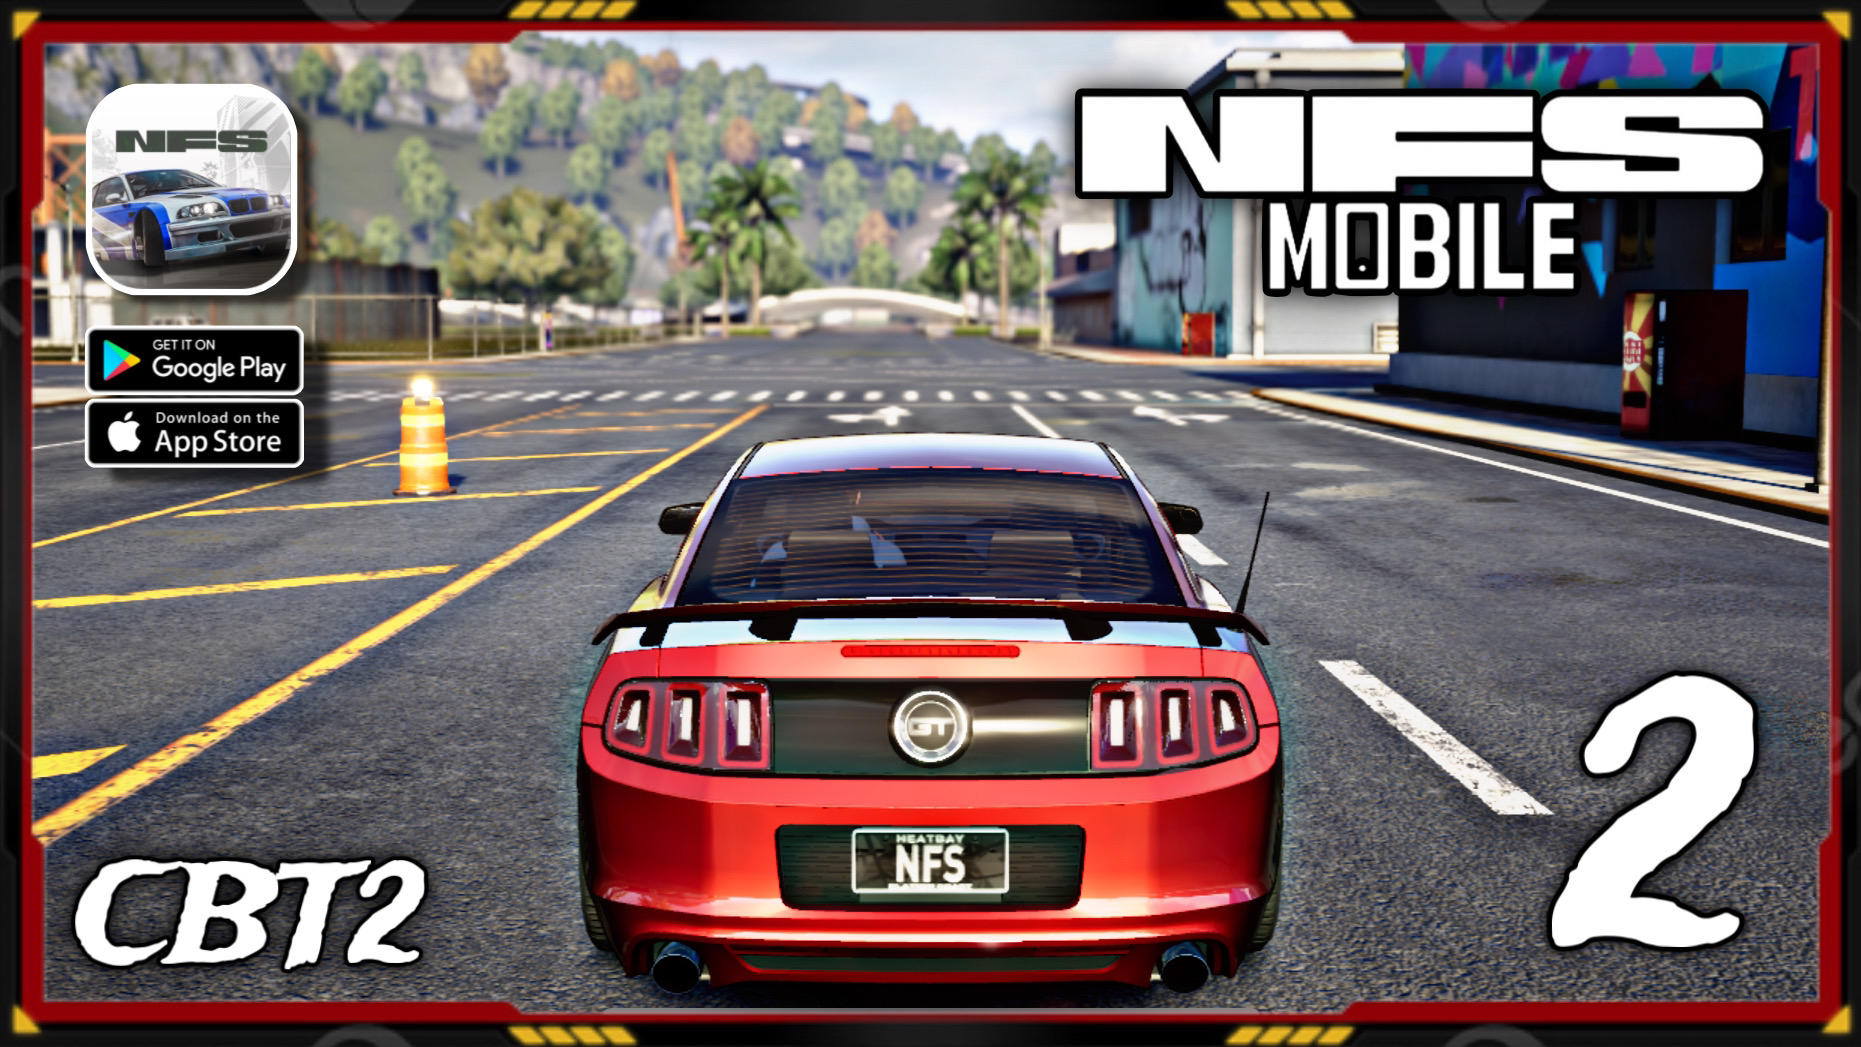 NFS: Mobile (CBT2) - Story Mode | Gameplay #2 - Unleashing the Narrative Thrills